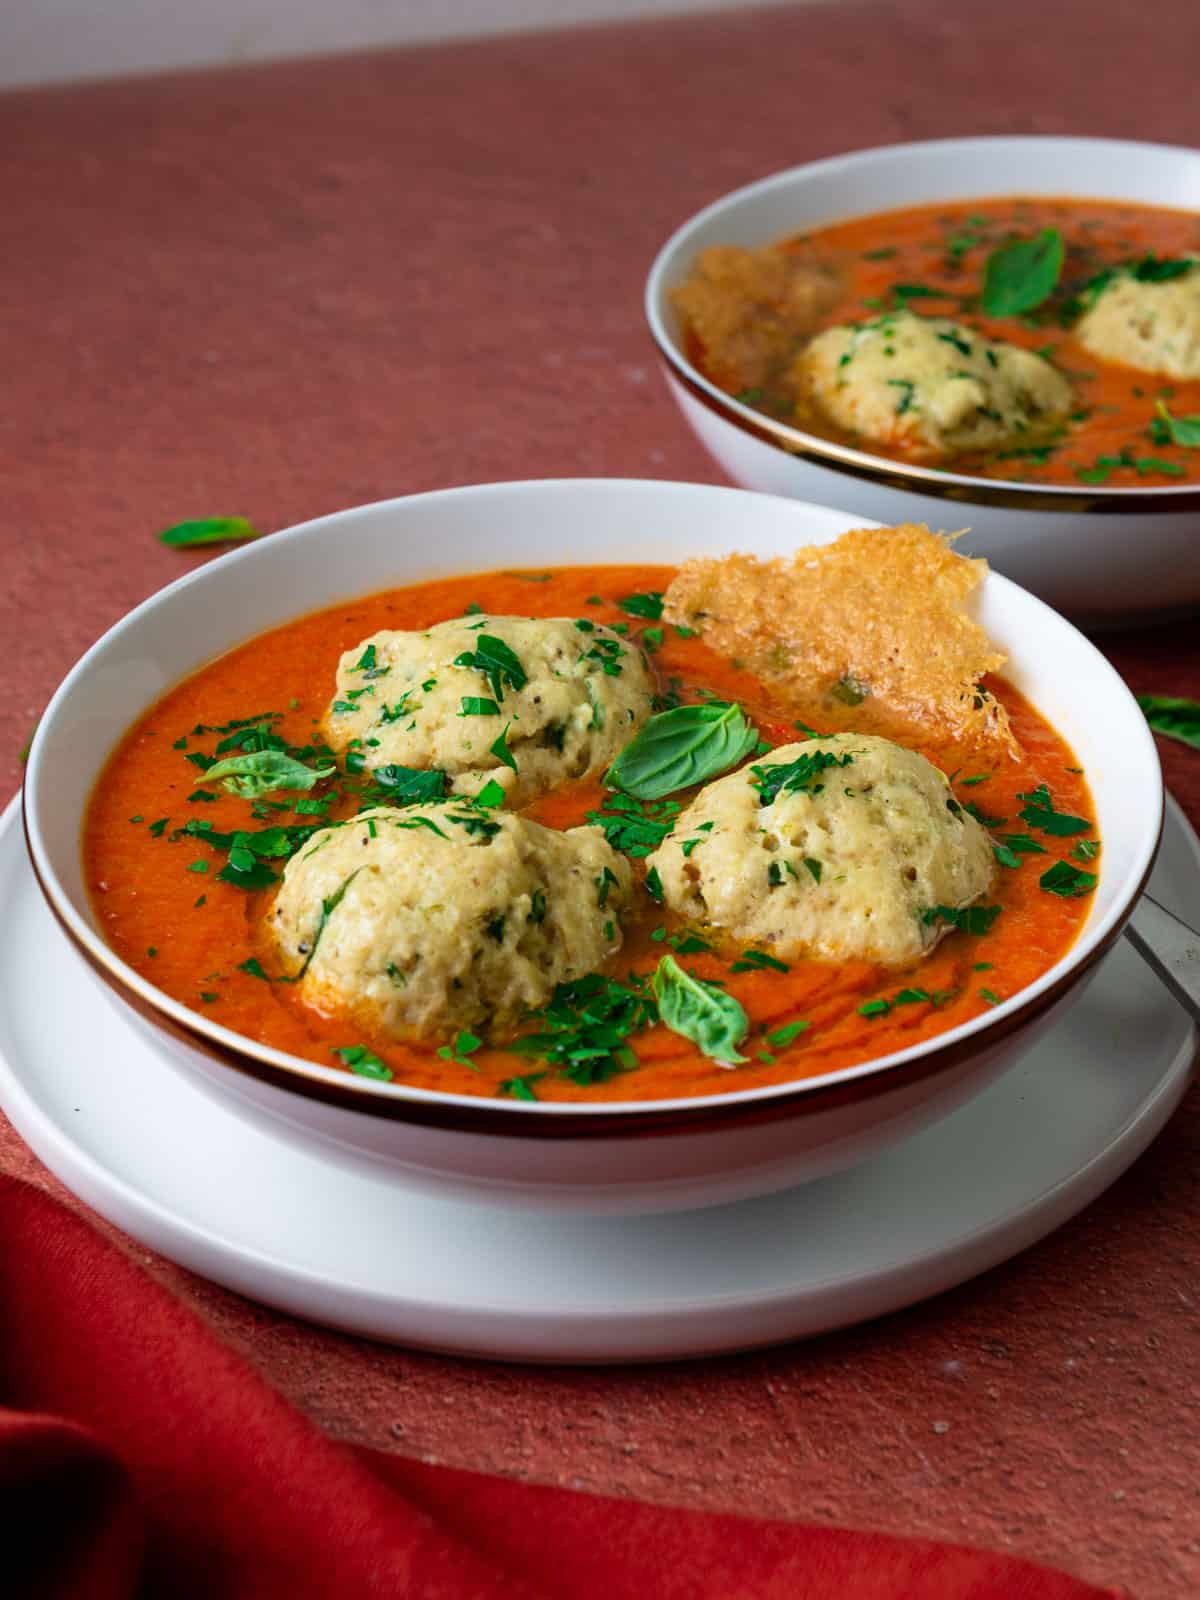 Roasted tomato soup with ricotta matzo balls and garnished with a parmesan crisp.